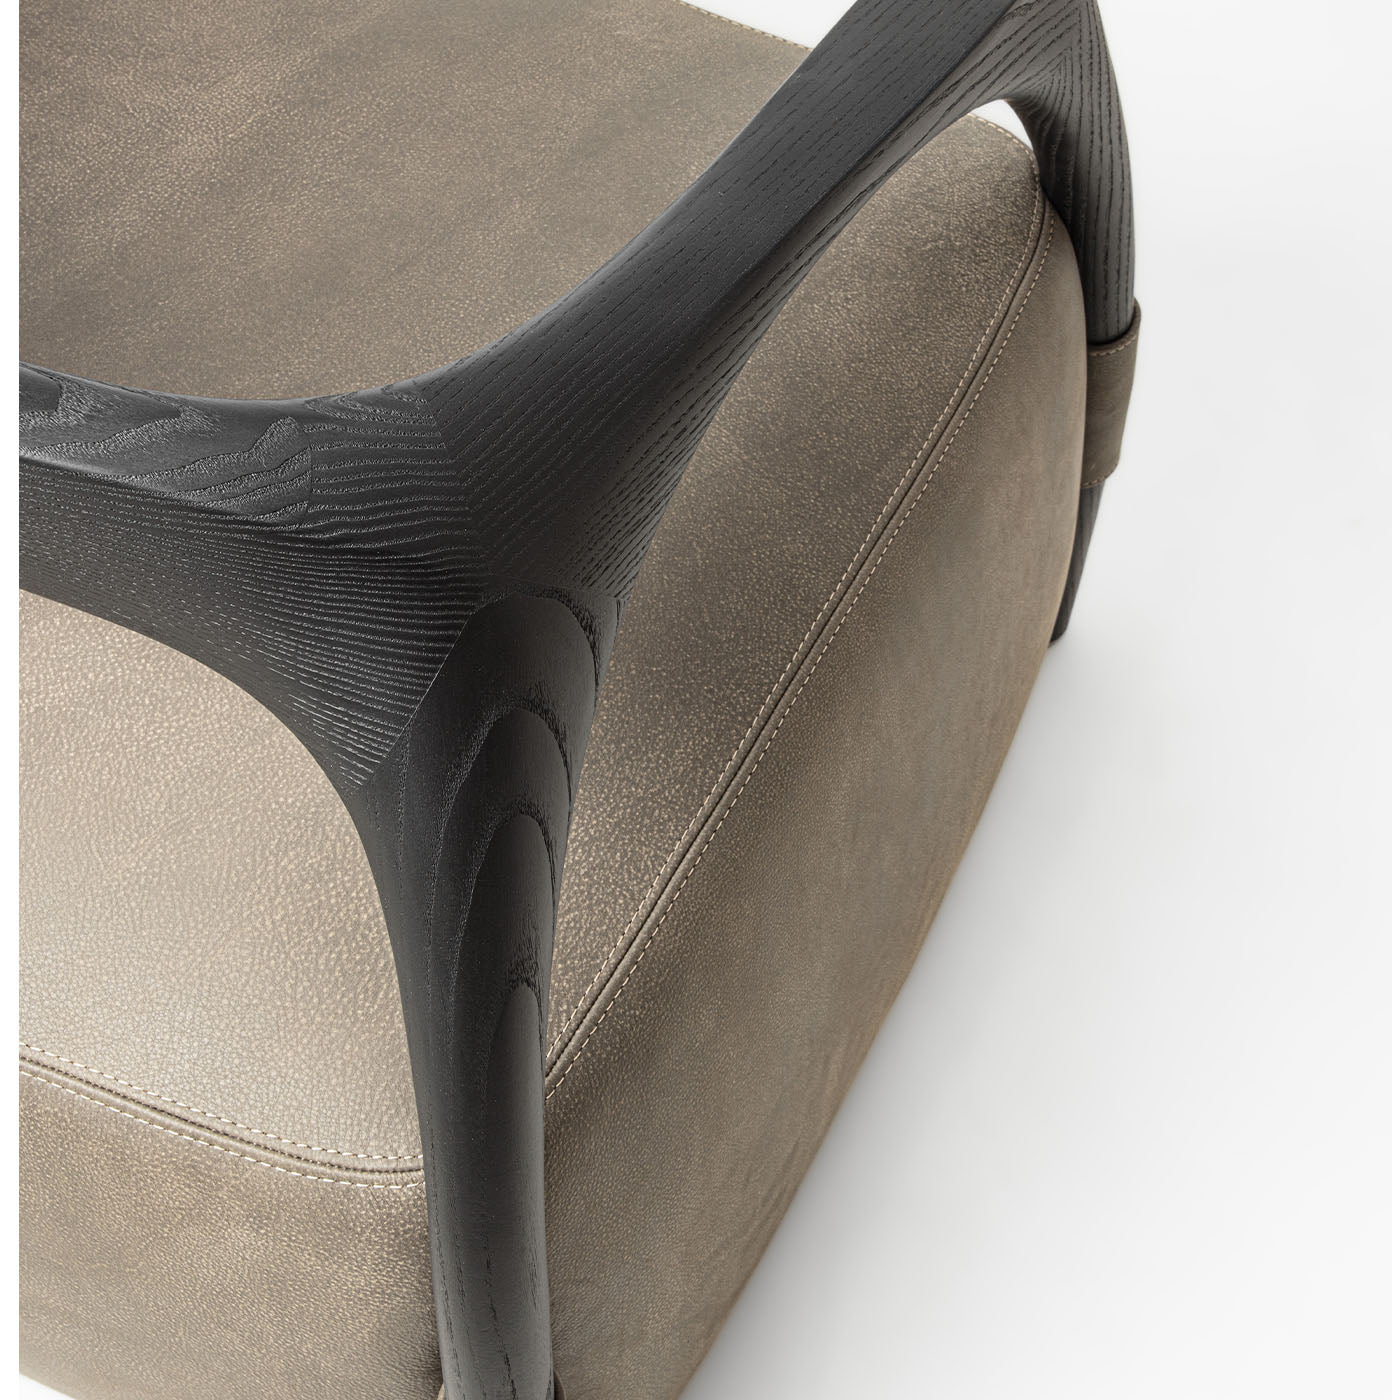 Chassis Black Ash Solid Wood Armchair & Leather Upholstery - Alternative view 5